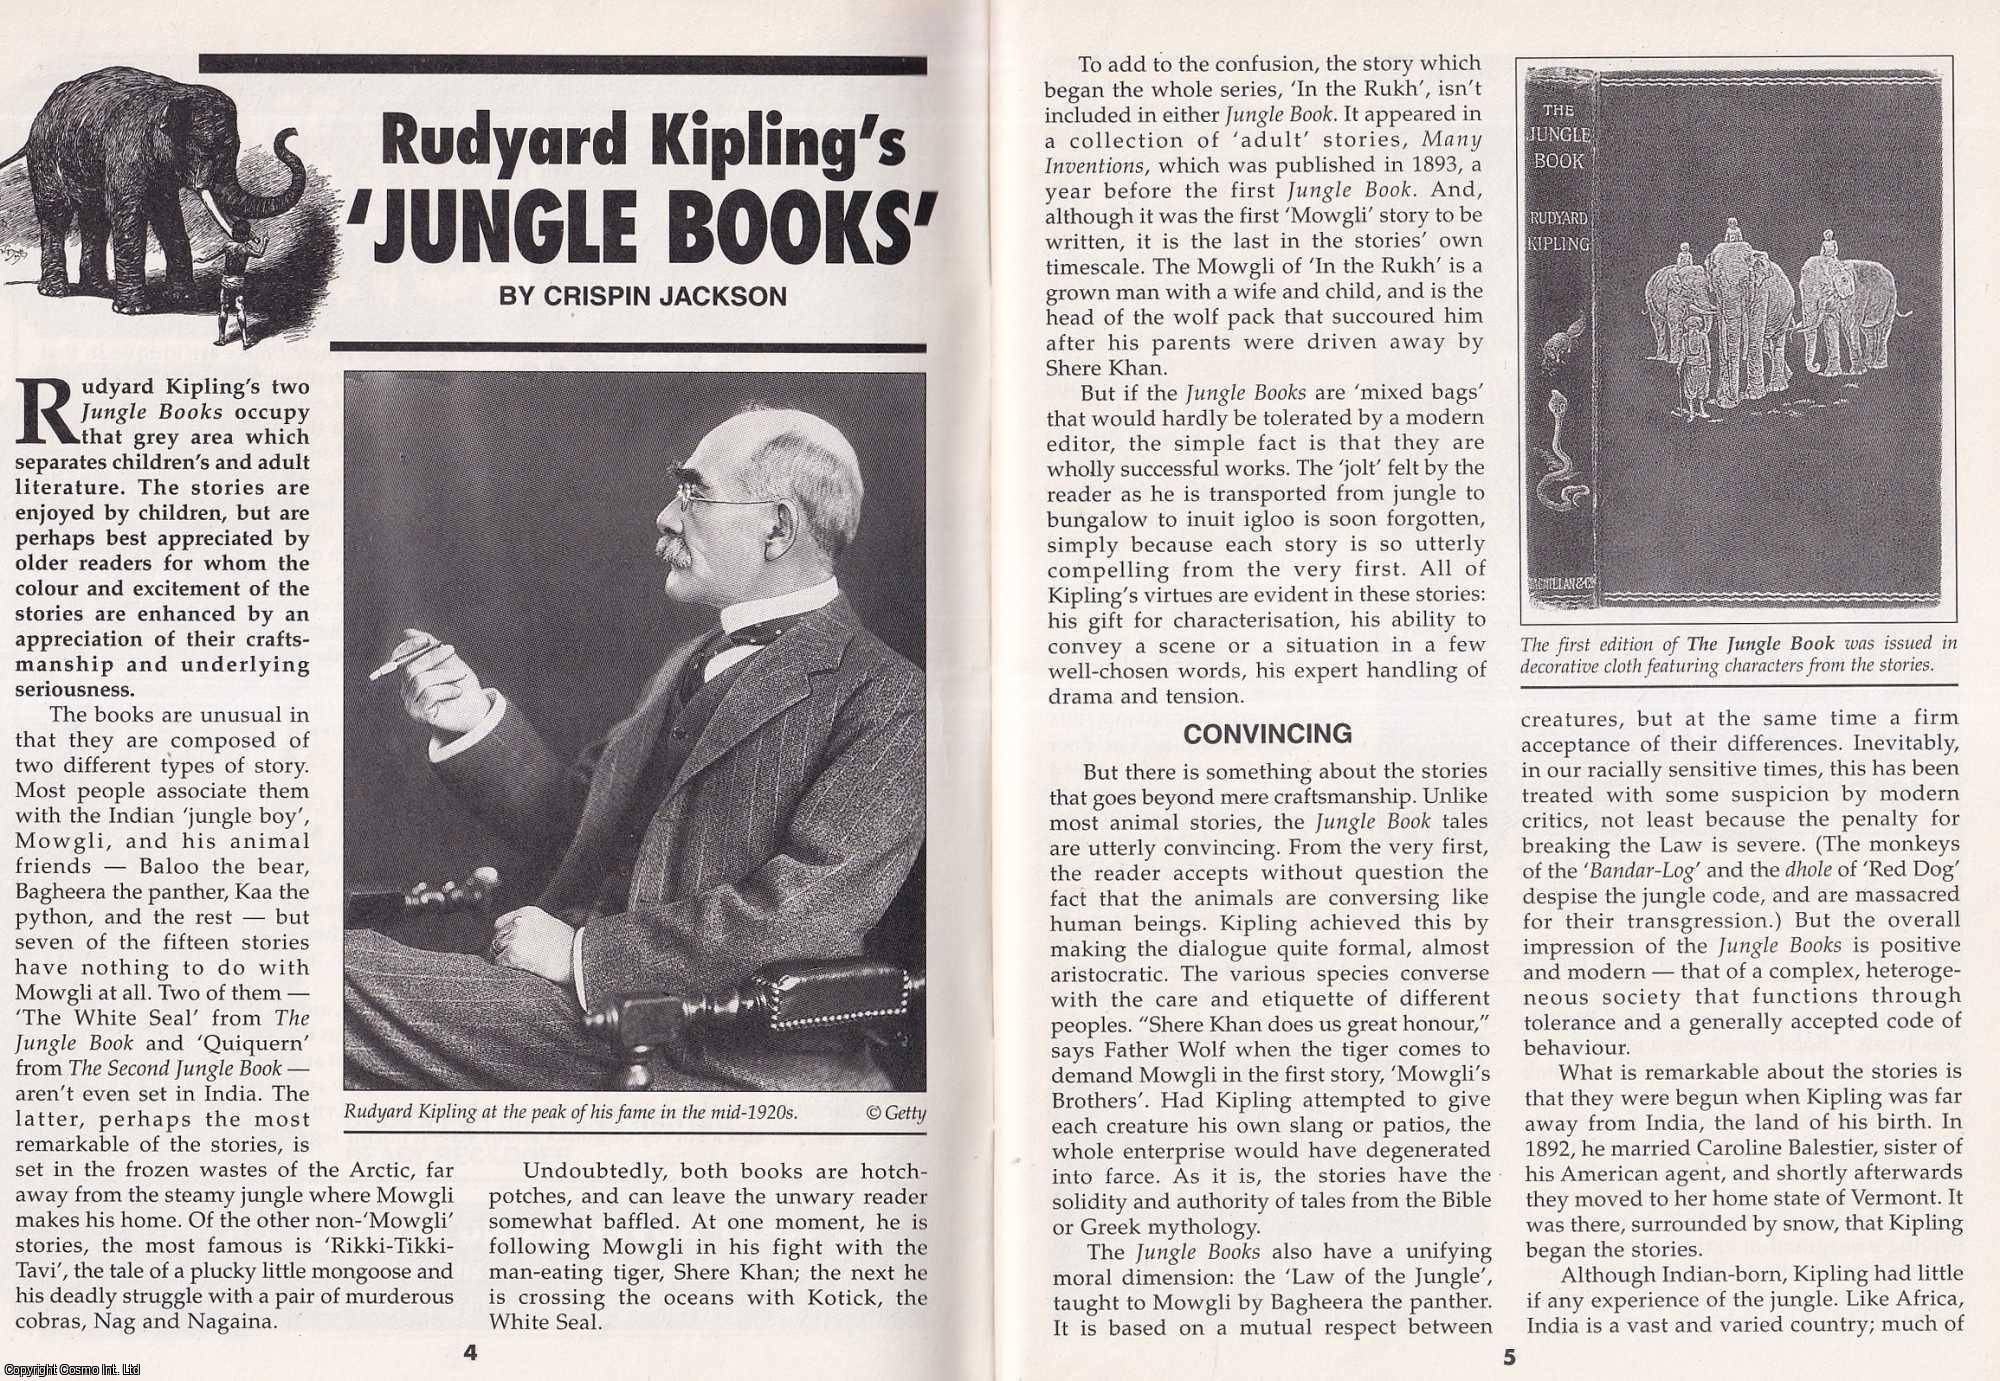 Crispin Jackson - Rudyard Kipling's Jungle Books. This is an original article separated from an issue of The Book & Magazine Collector publication.